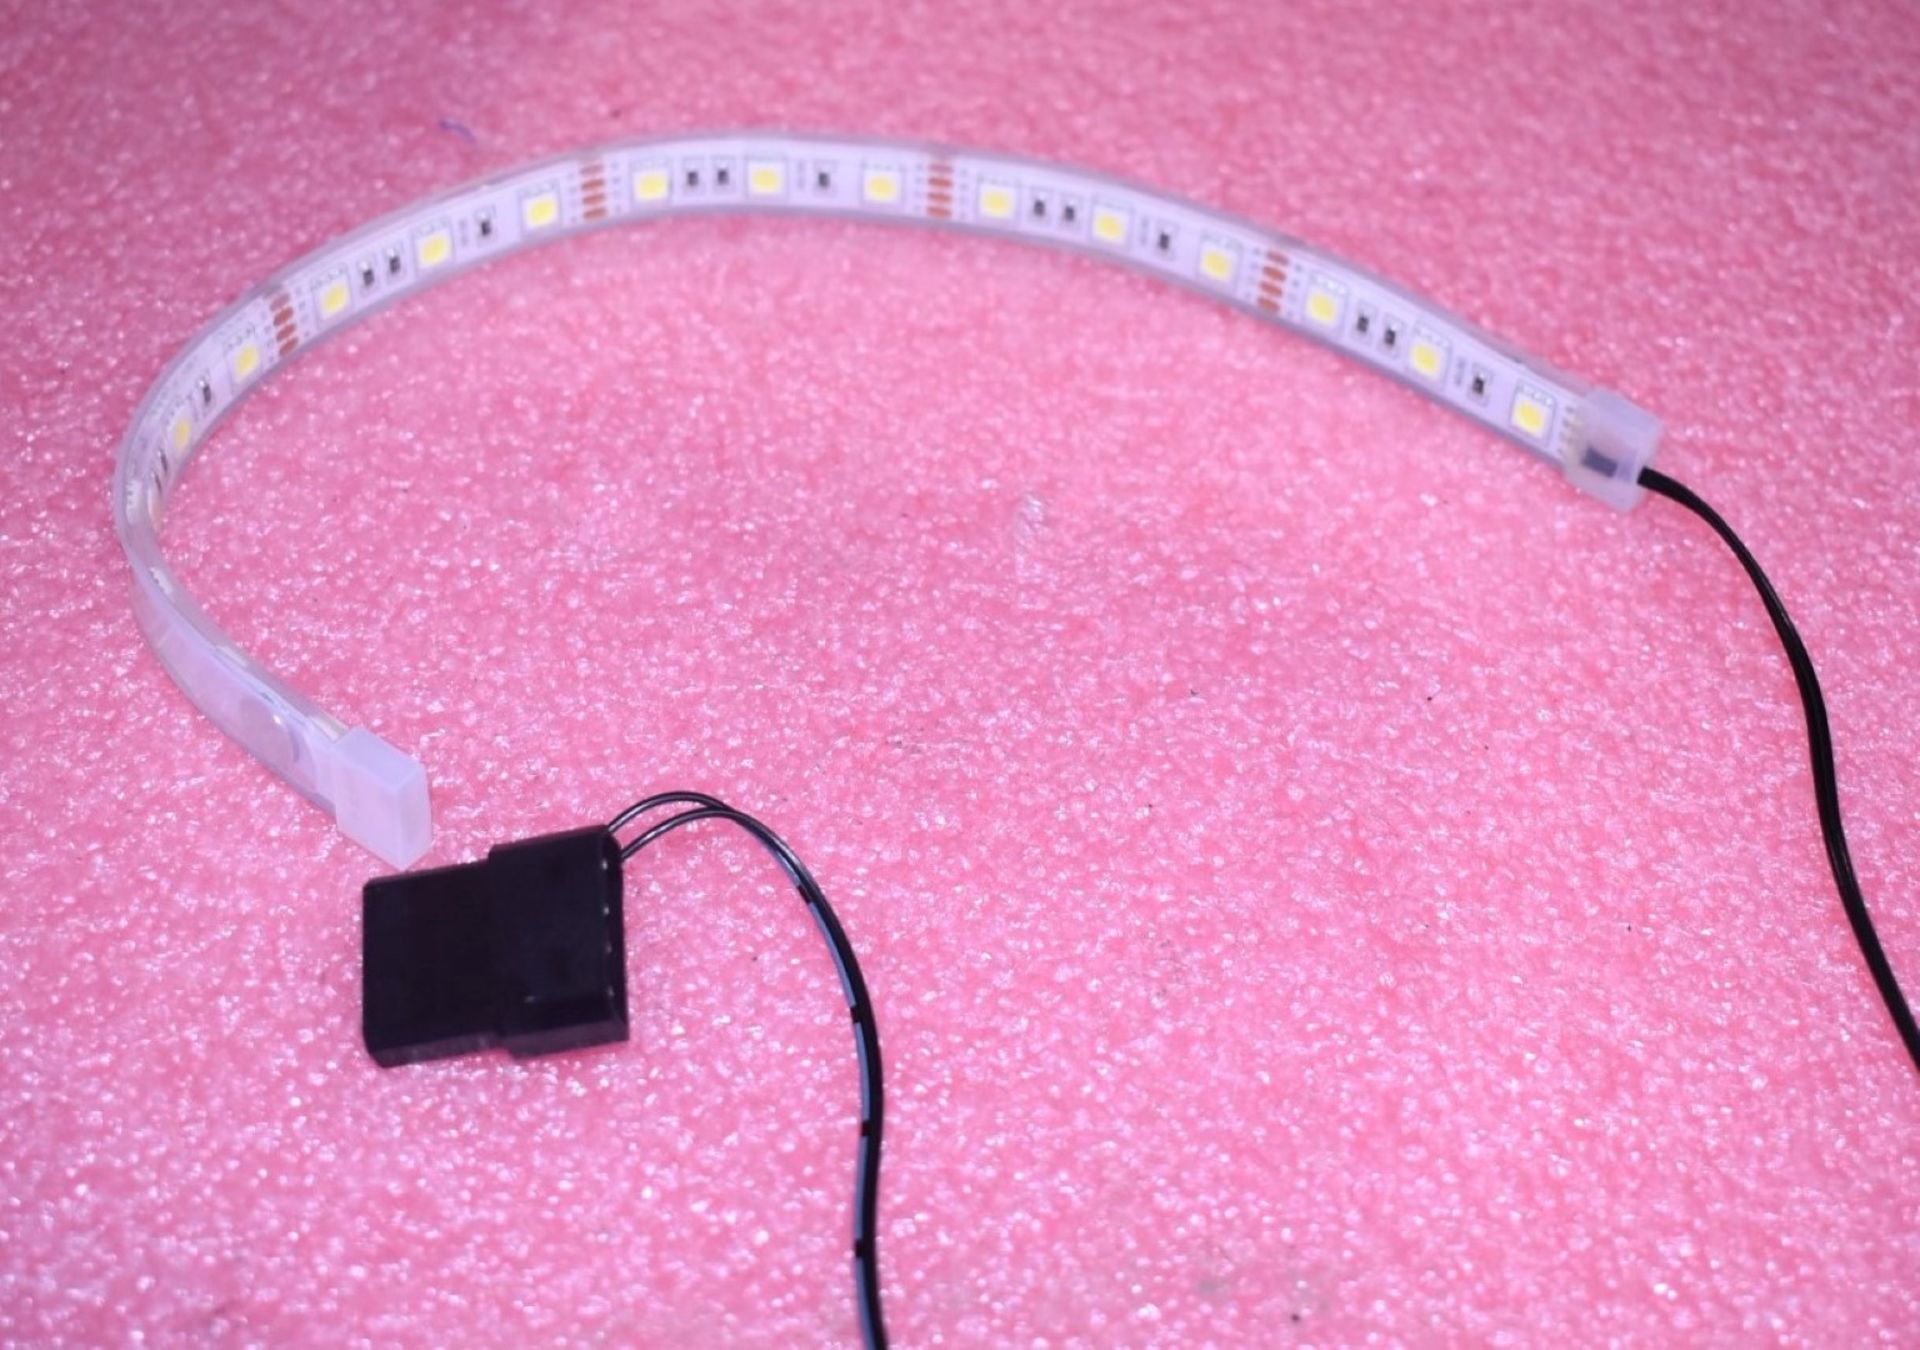 100 x PC Case Illumination 12 Inch LED Strips With Molex Connectors - New Sealed Packets - Image 5 of 5